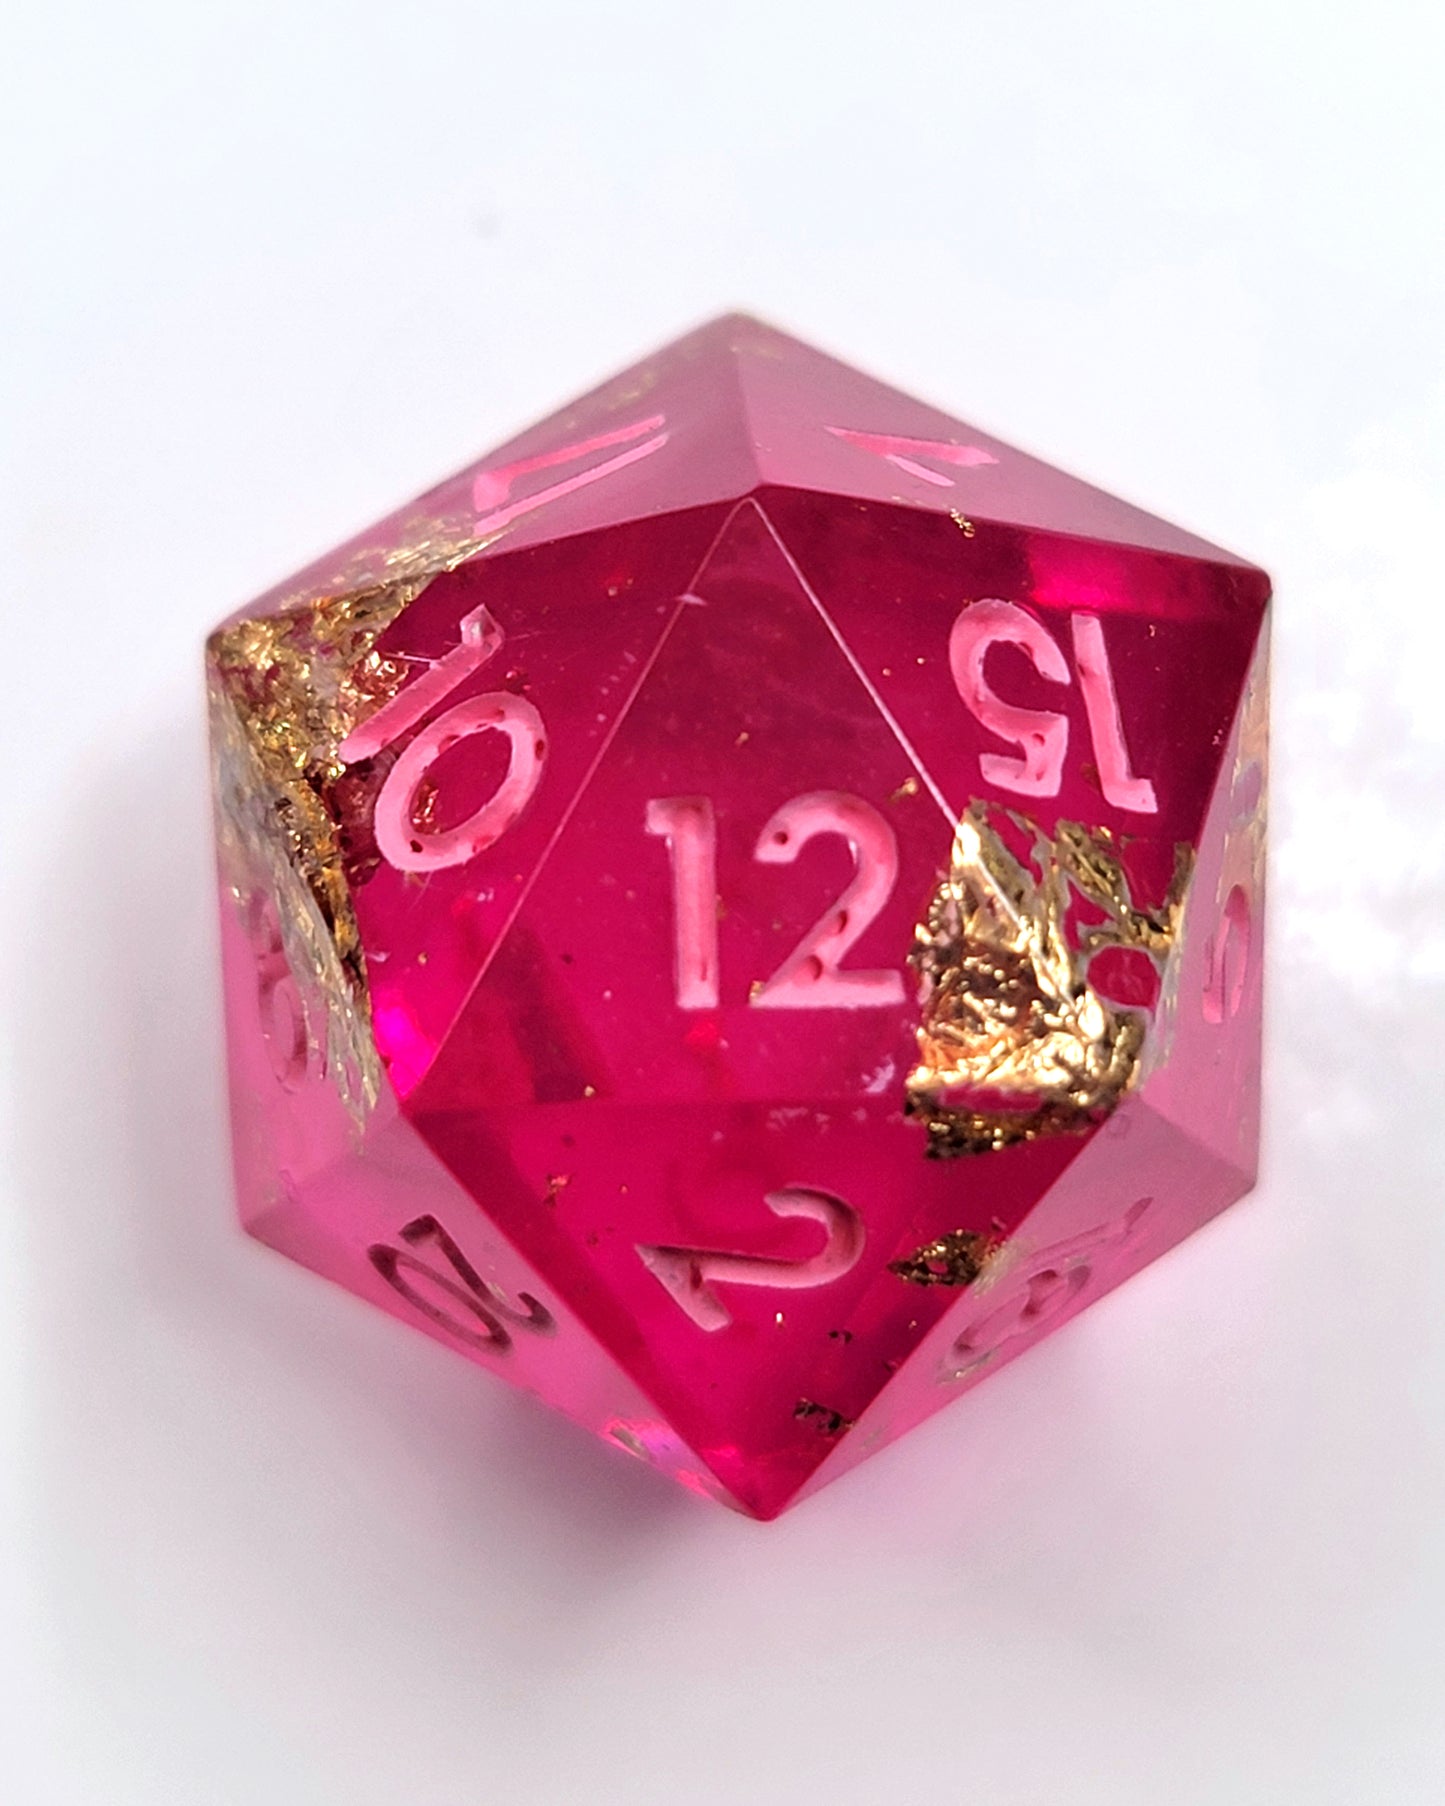 Princess -1 D20 | Handmade Dice | Hand Crafted Dungeons and Dragons Dice